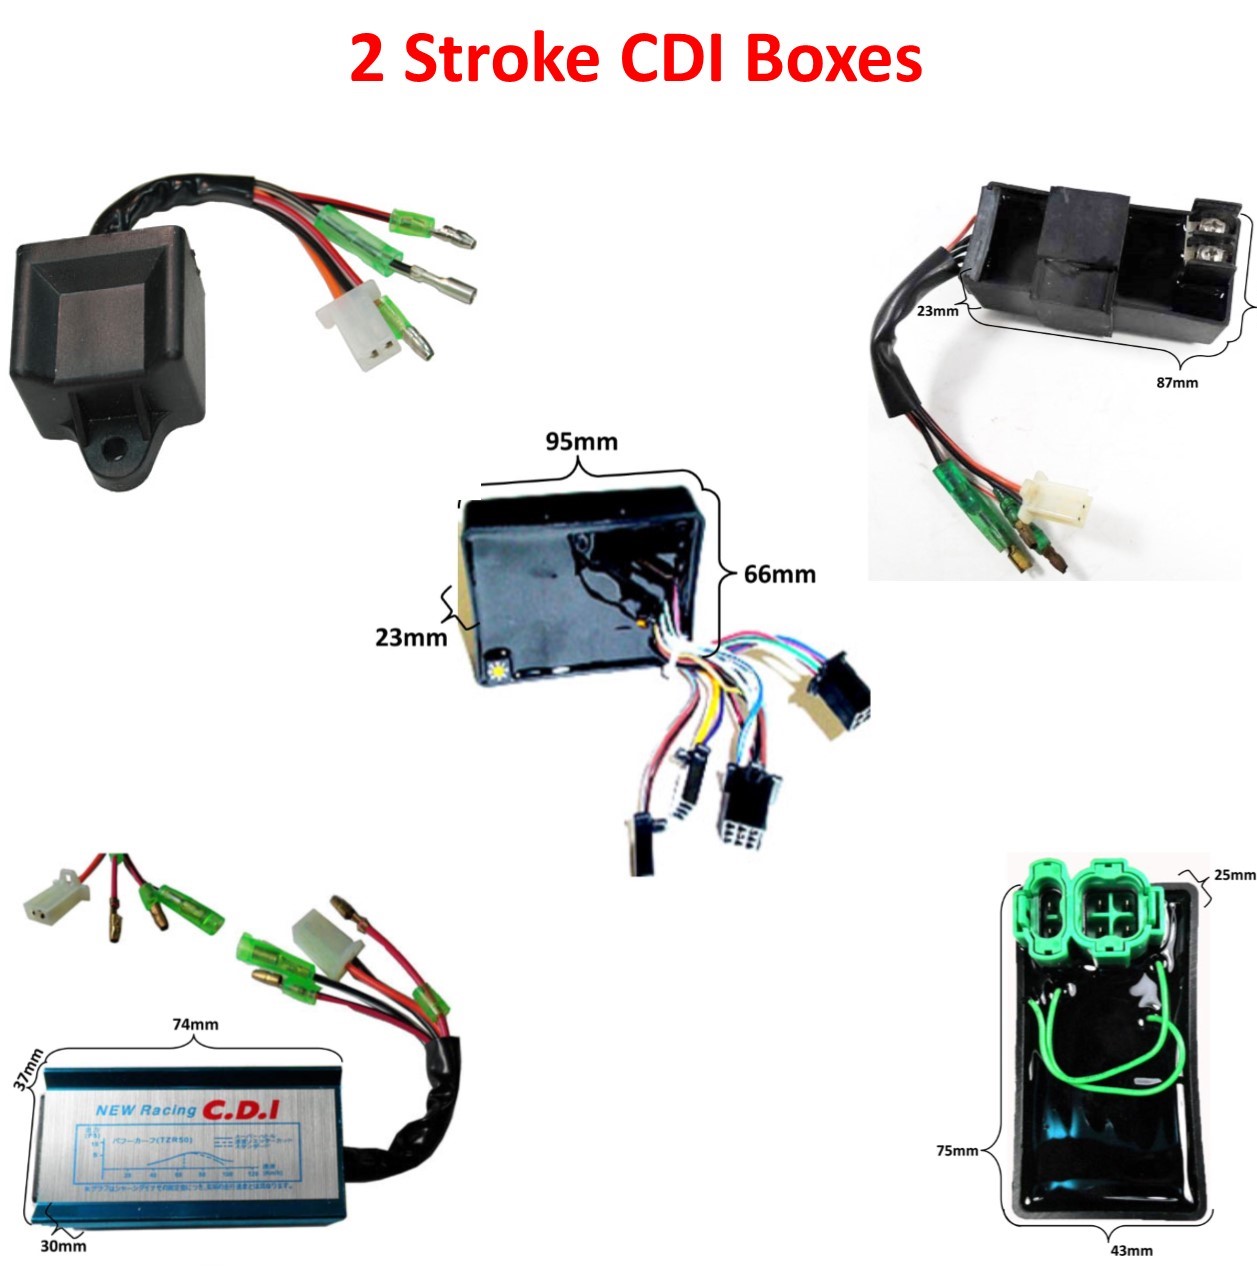 2 Stroke CDI's and Light Boxes